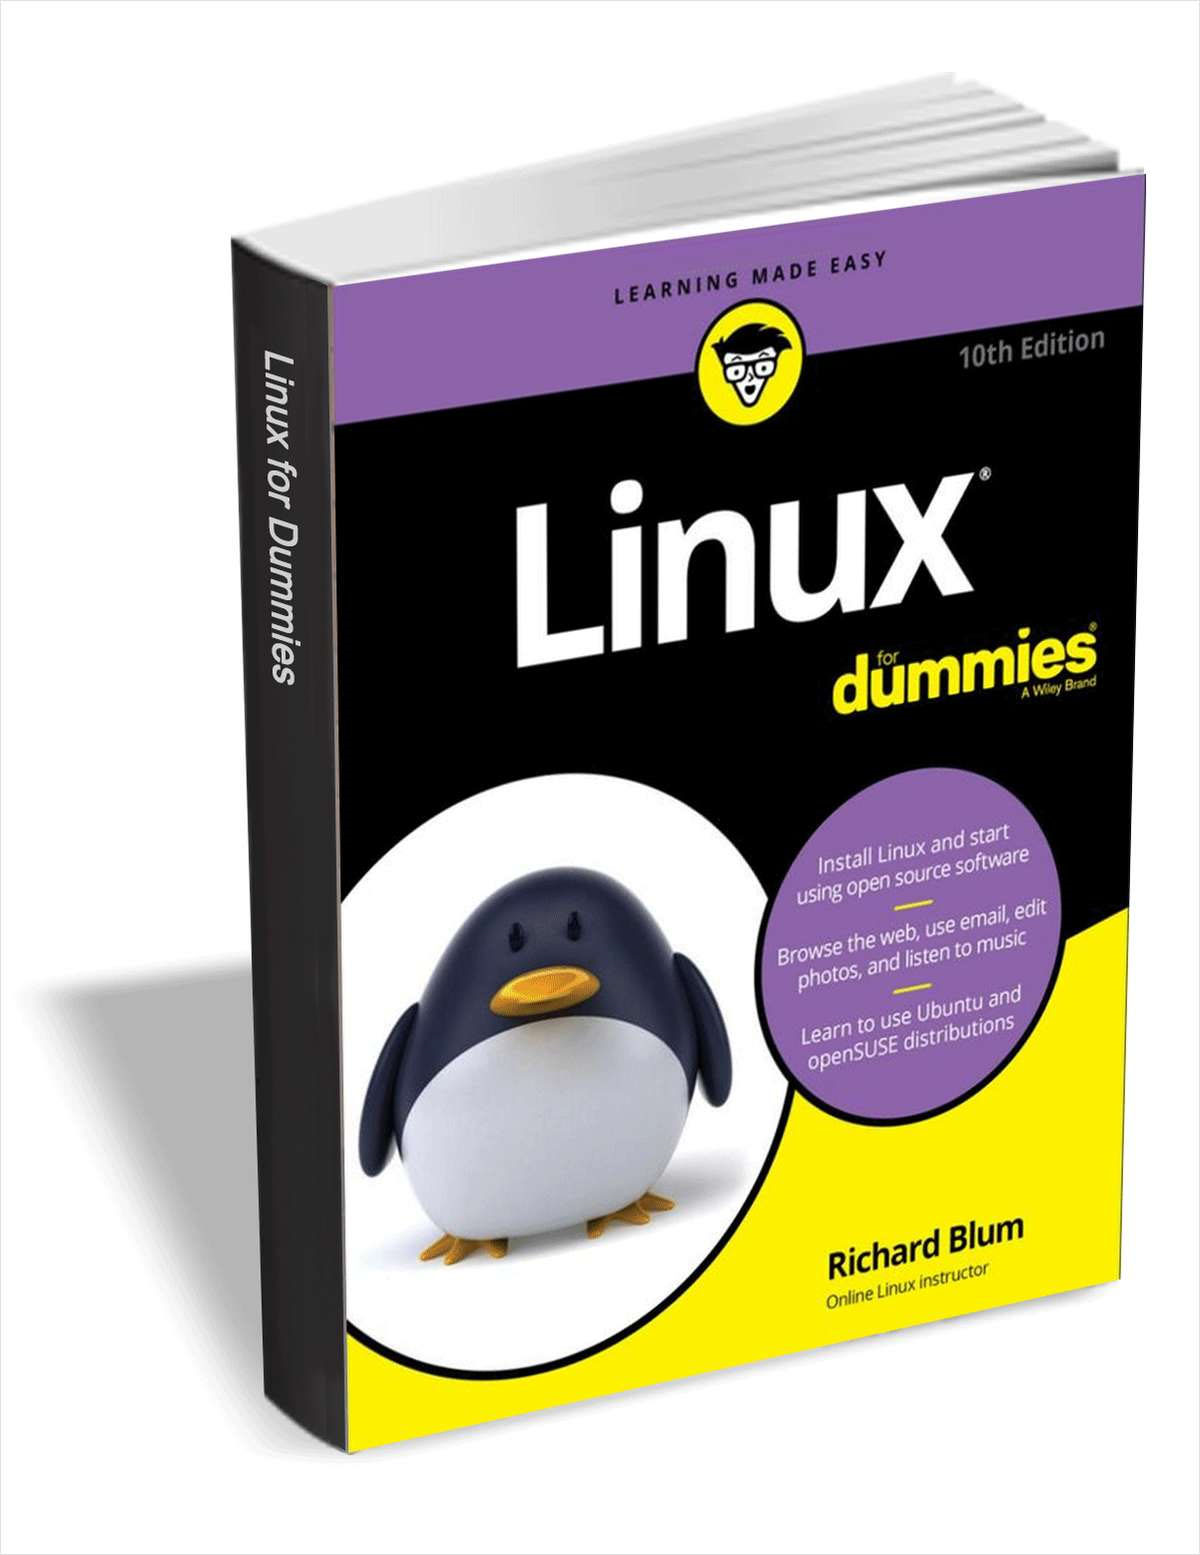 Linux For Dummies, 10th Edition ($21.00 Value) FREE for a Limited Time Screenshot